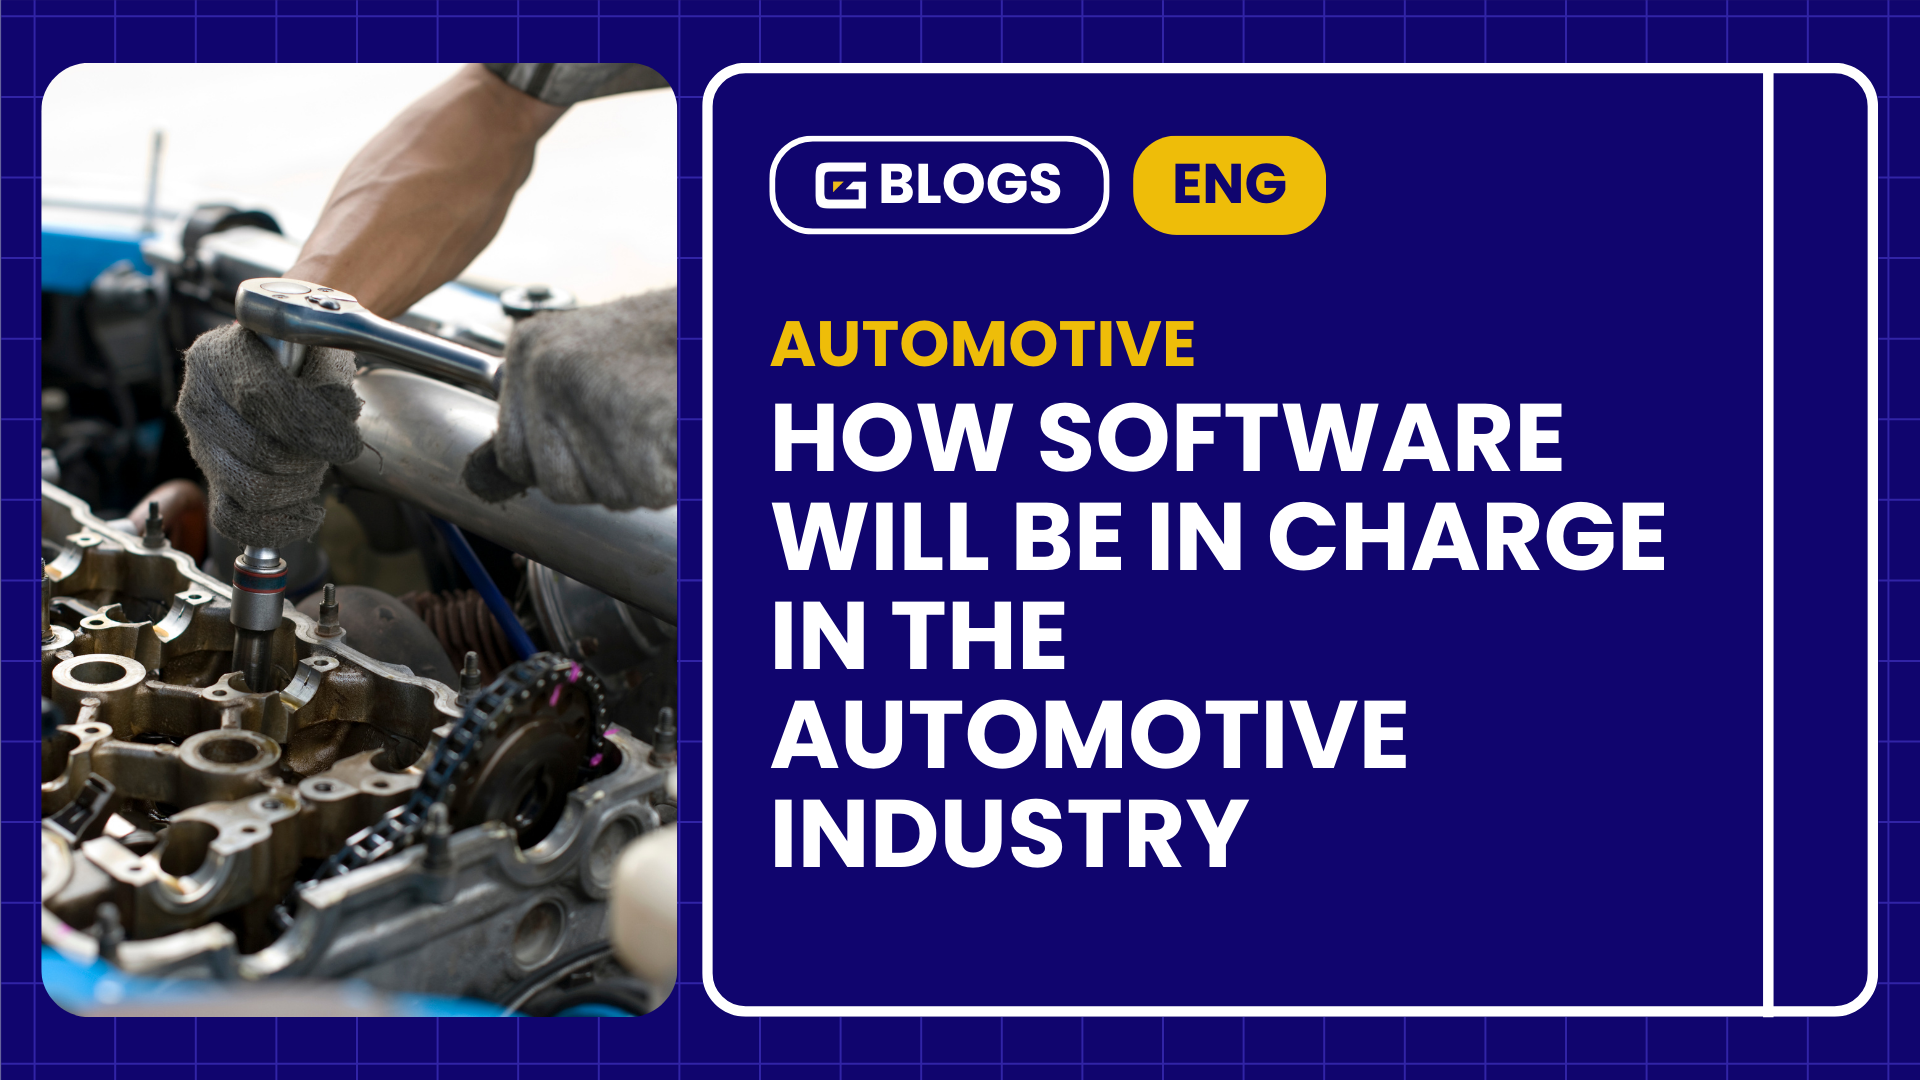 How Software Will Be in Charge in the Automotive Industry